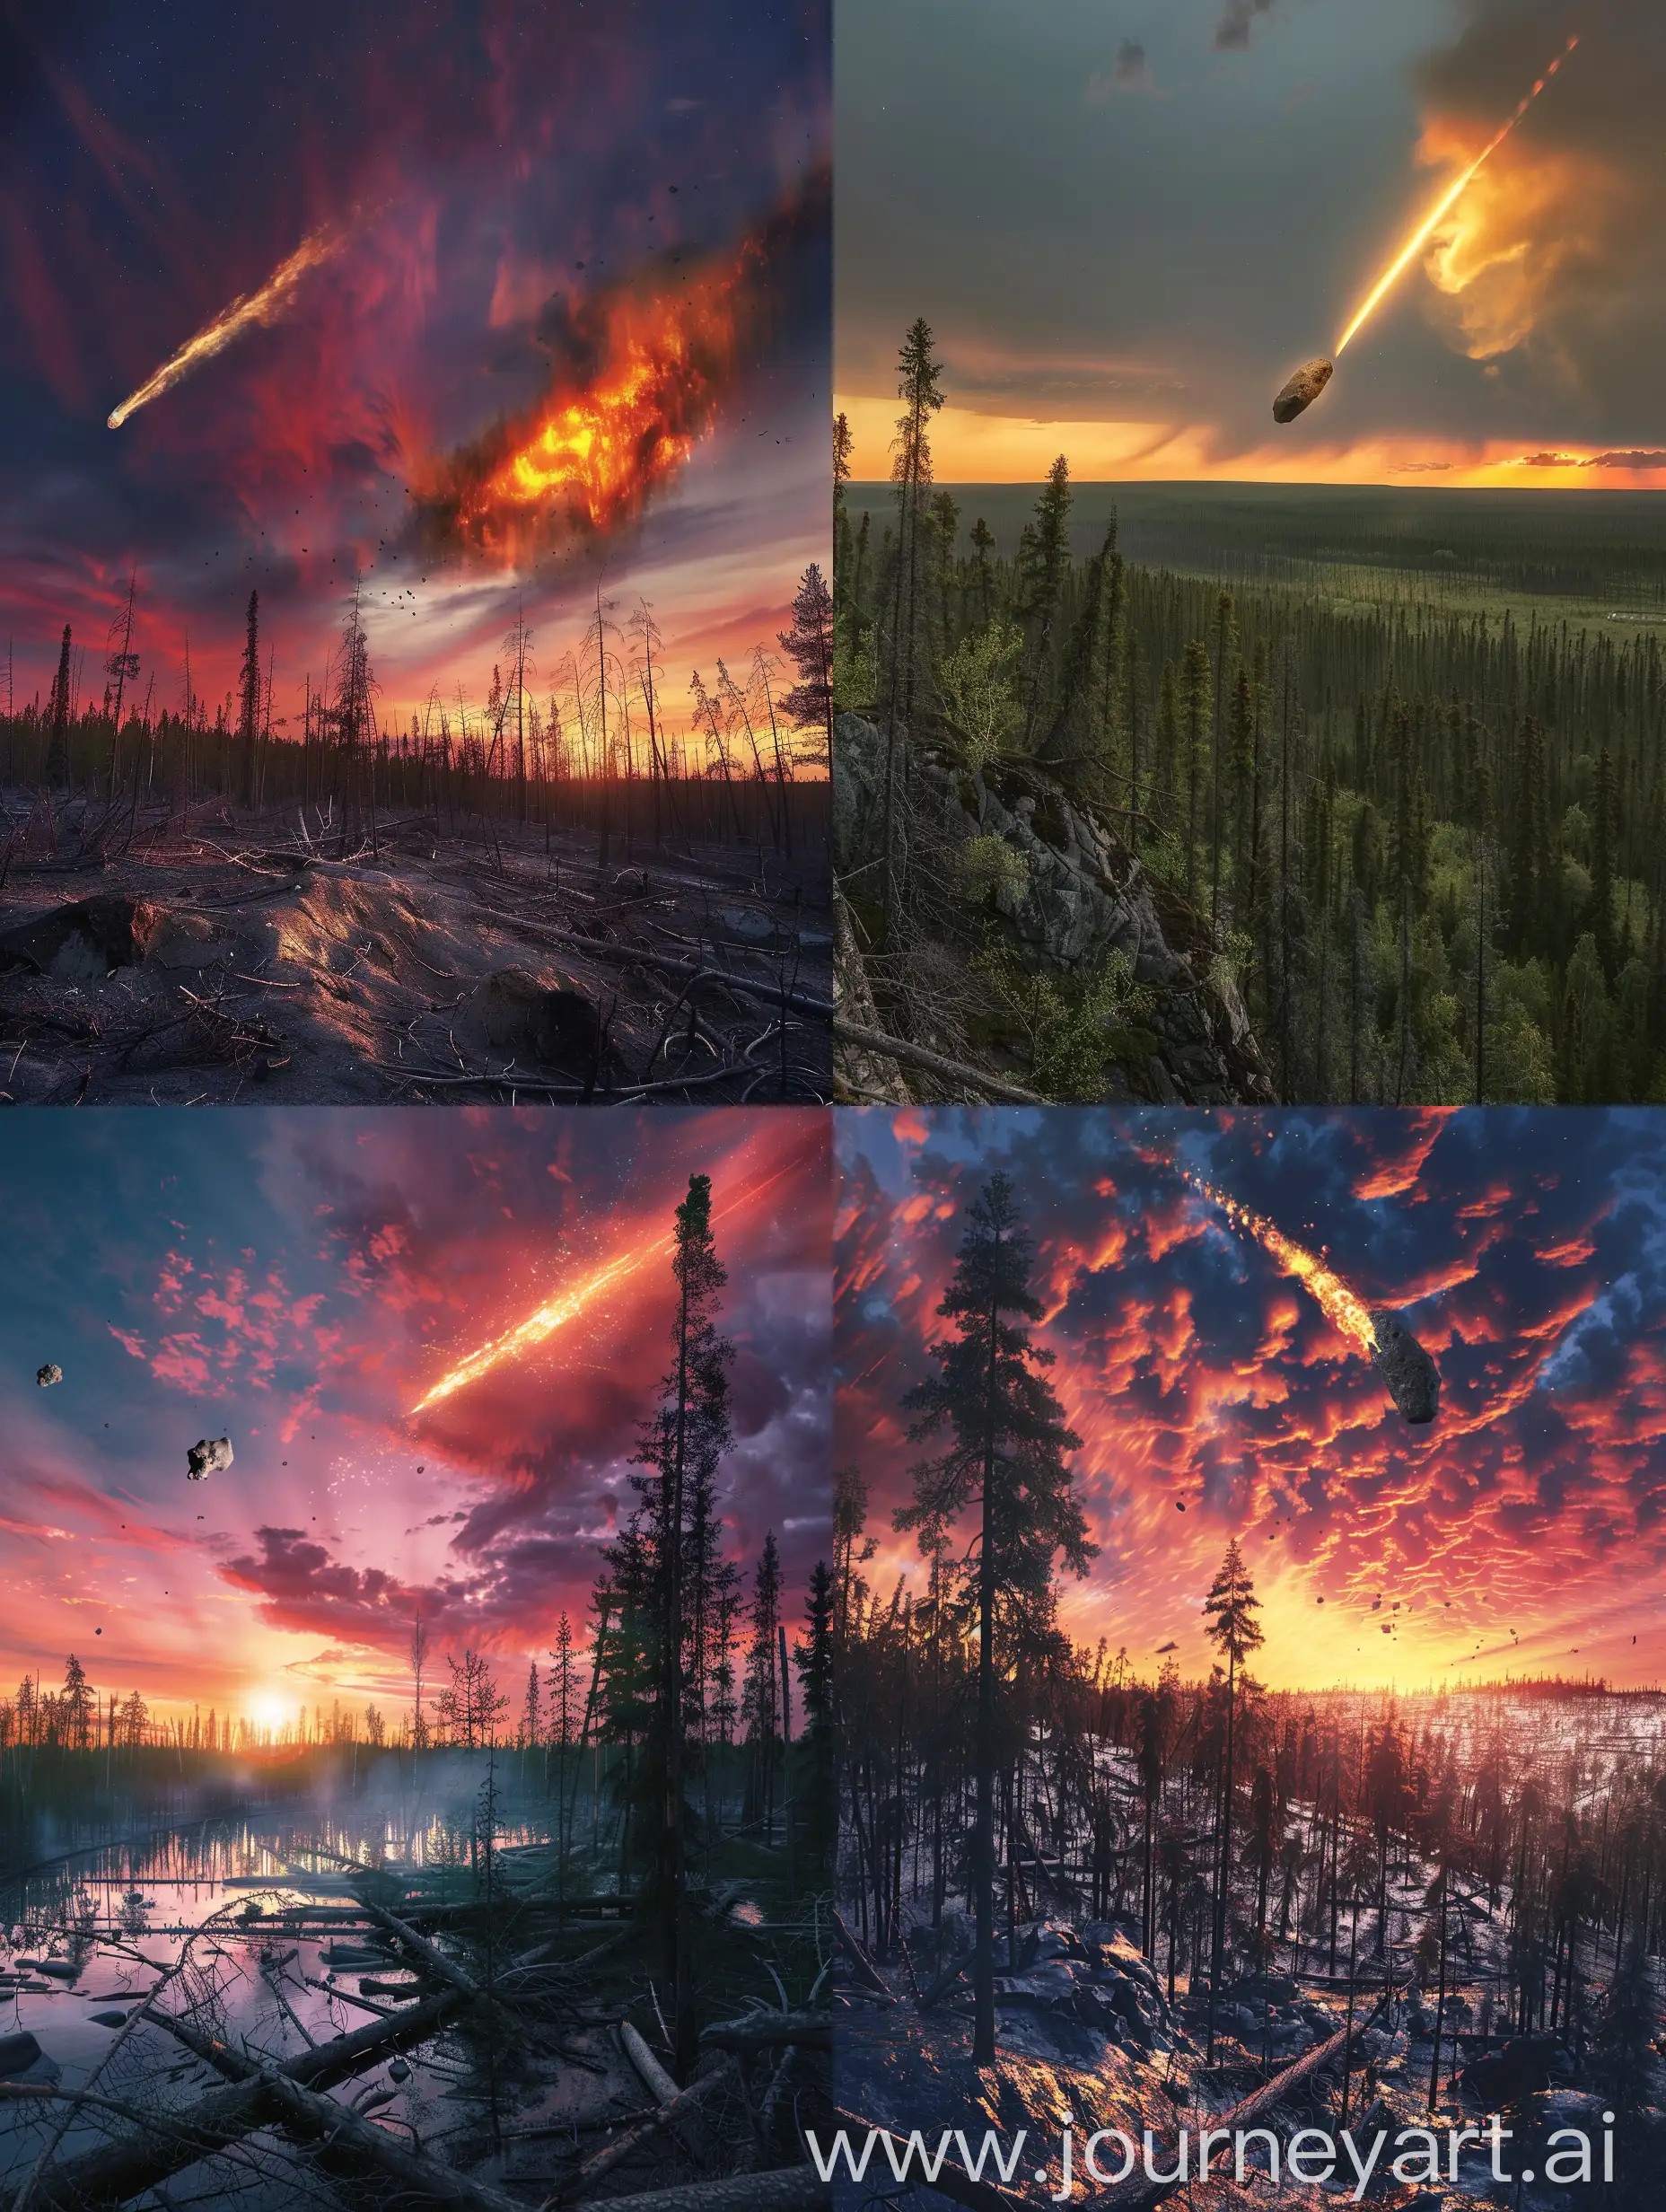 A pristine forest,  now flattened an estimated 80 million trees, stretching across an astonishing 2,150 km., the sun dipped below the horizon on that fateful evening, the Siberian sky suddenly ignited with an otherworldly brilliance asteroid, carrying the force of 3–5 megatons, transformed the canvas of nature into a spectacle of destruction.